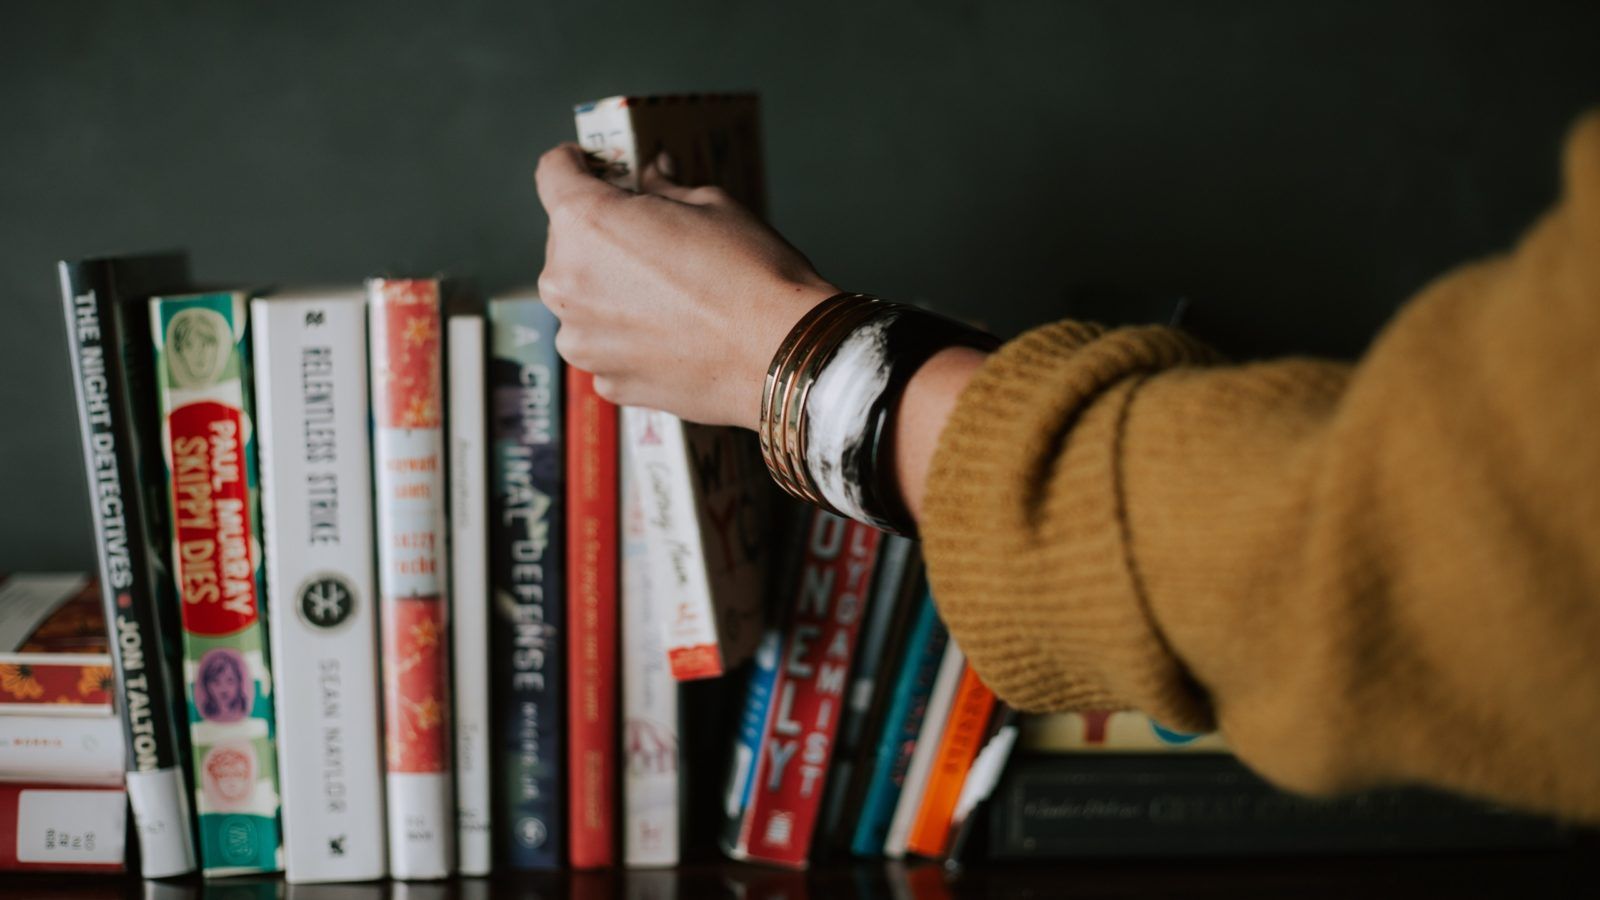 10 book recommendations for aspiring young entrepreneurs